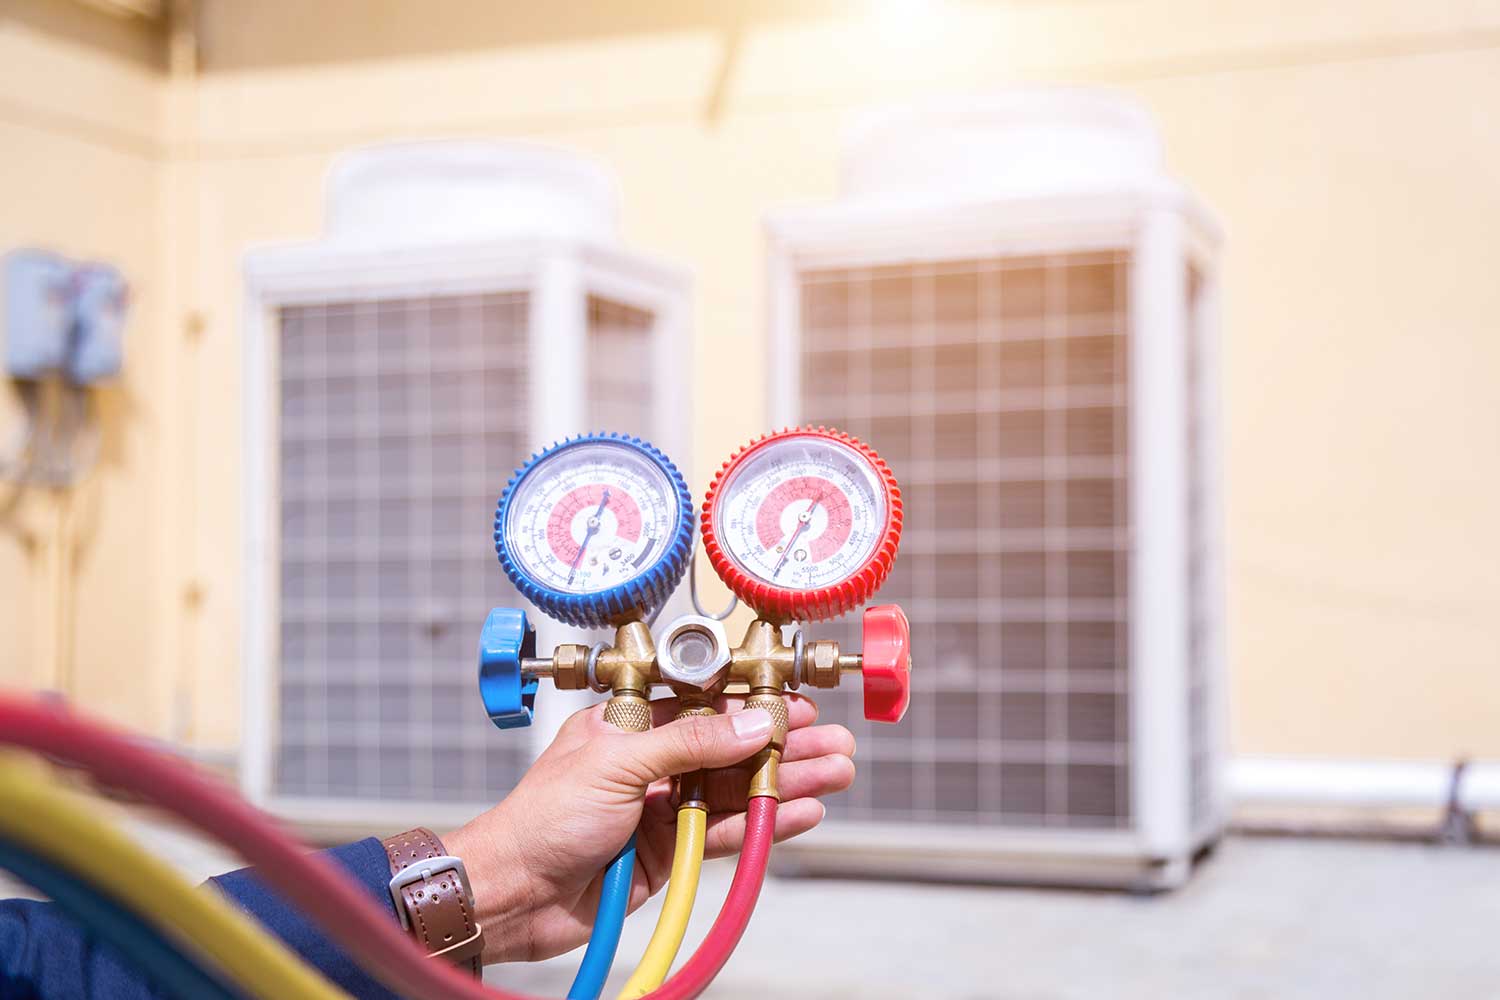 Husband installs HVAC systems all day, without any AC for himself